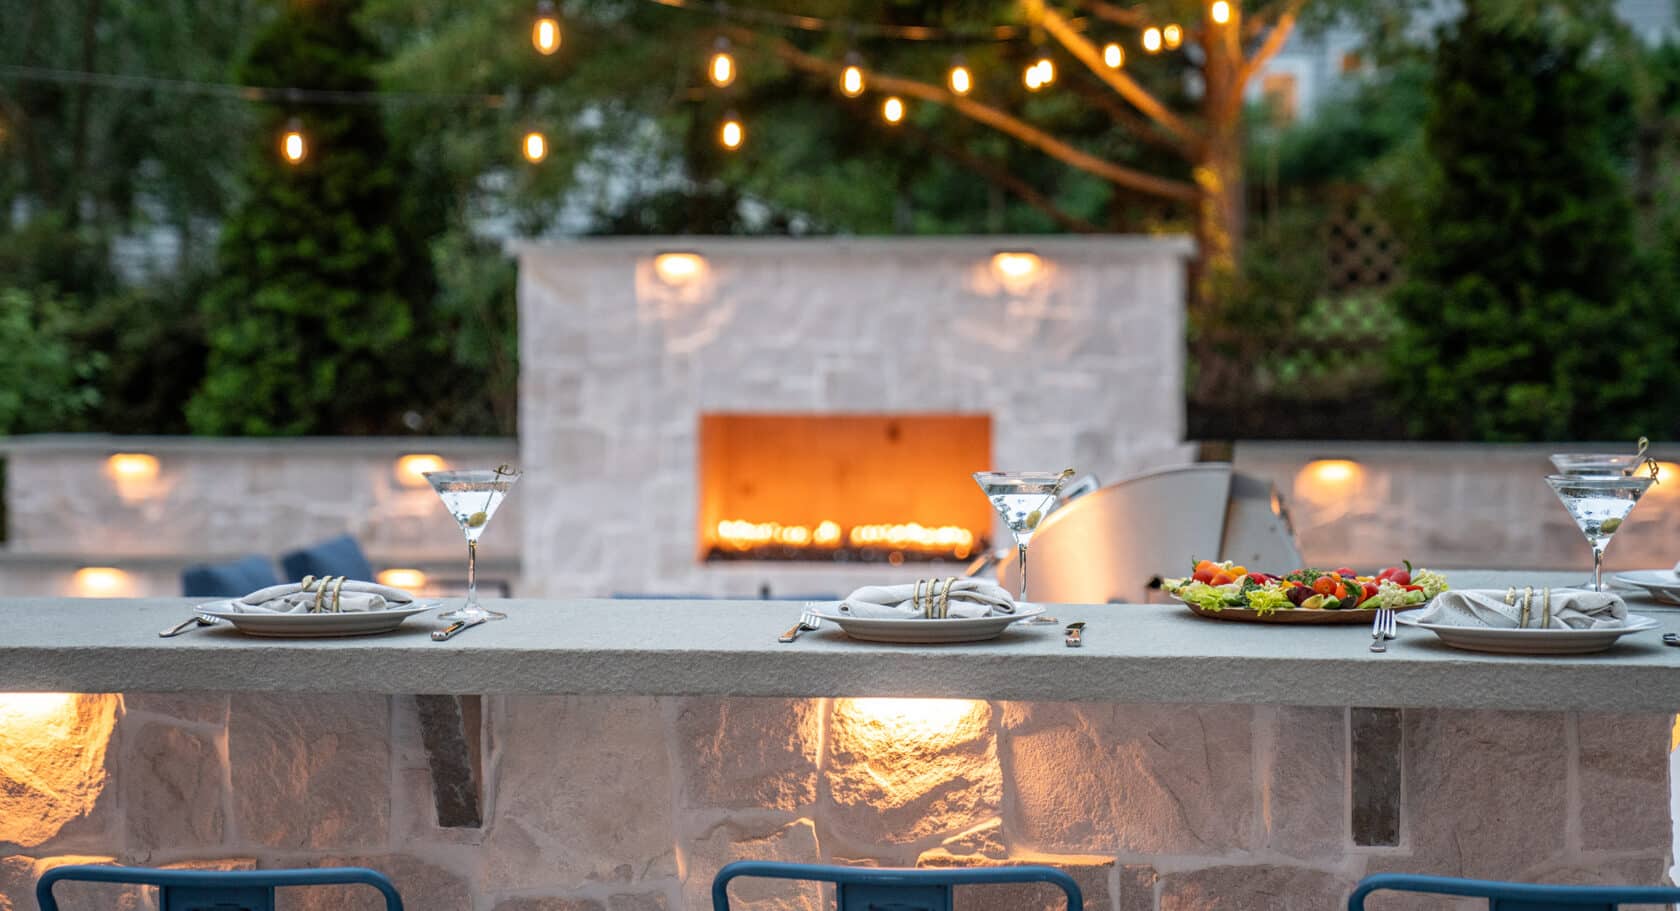 Evening martinis at the patio bar overlooking a gas fireplace with outdoor string lights & integrated landscape lighting.